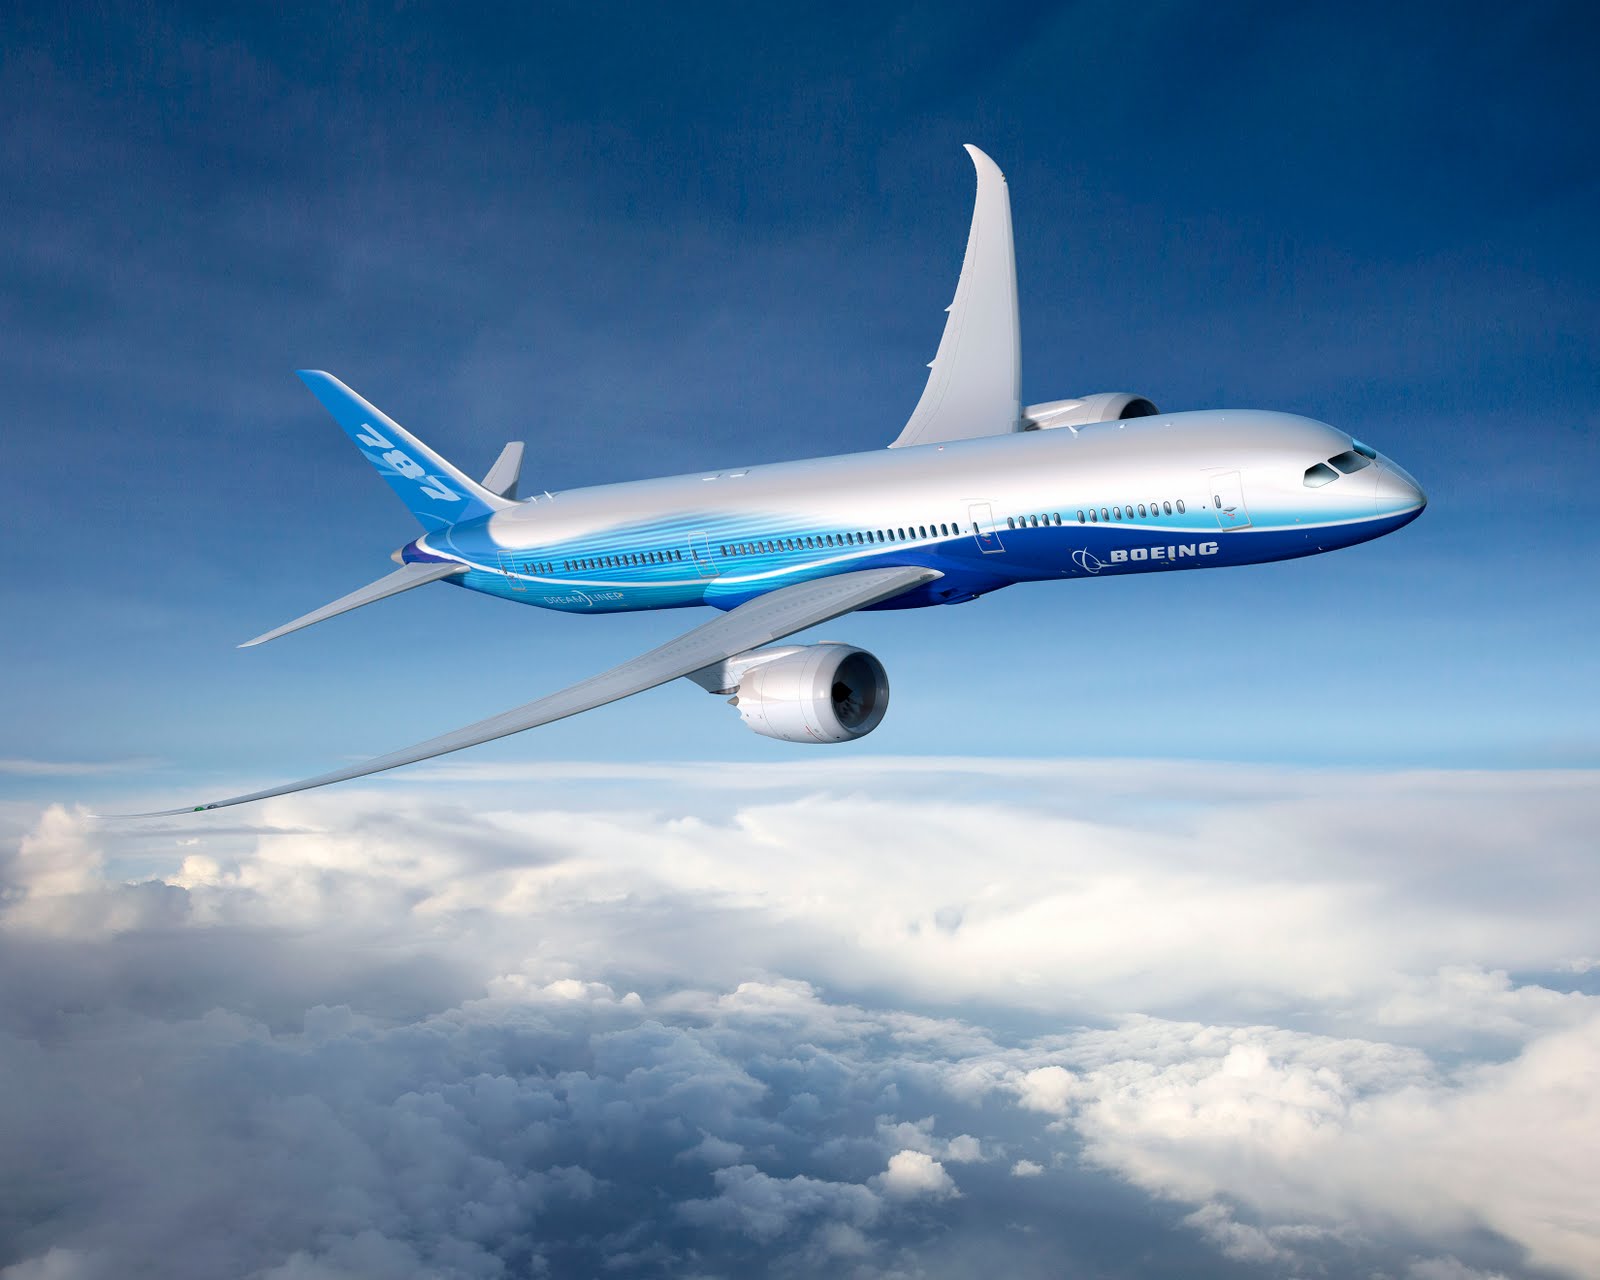 Boeing 787 Backgrounds, Compatible - PC, Mobile, Gadgets| 1600x1280 px